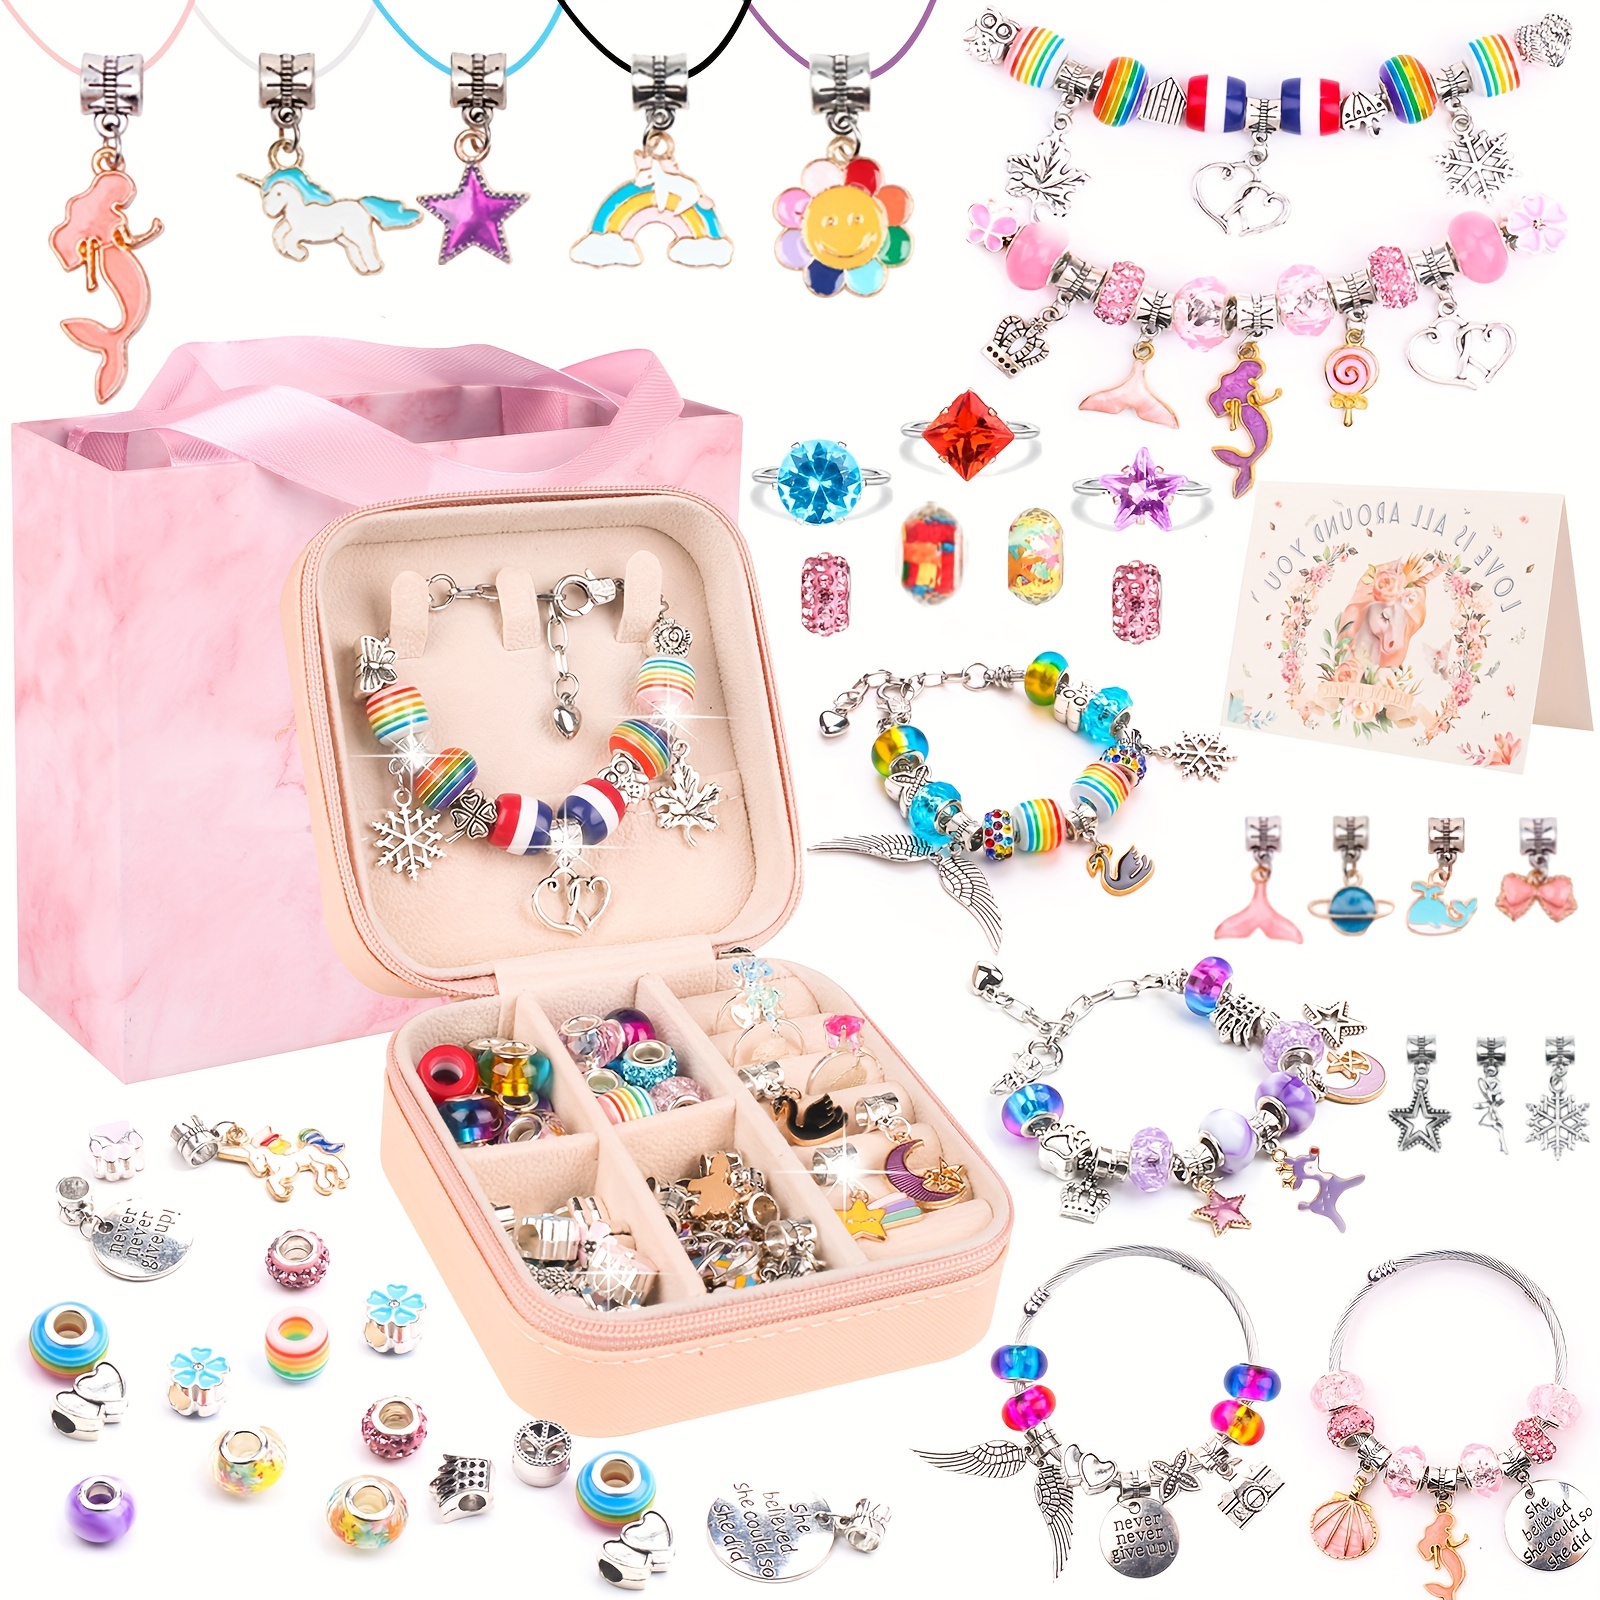  Charm Bracelets Making Kit for Girls,73Pcs Jewelry Making  Supplies Unicorn Mermaid Crafts Beads Bracelets,DIY Necklace Making Kits  Gifts for Kids Teens Age 7-12 with Cute Horse Gift Box (Pink)